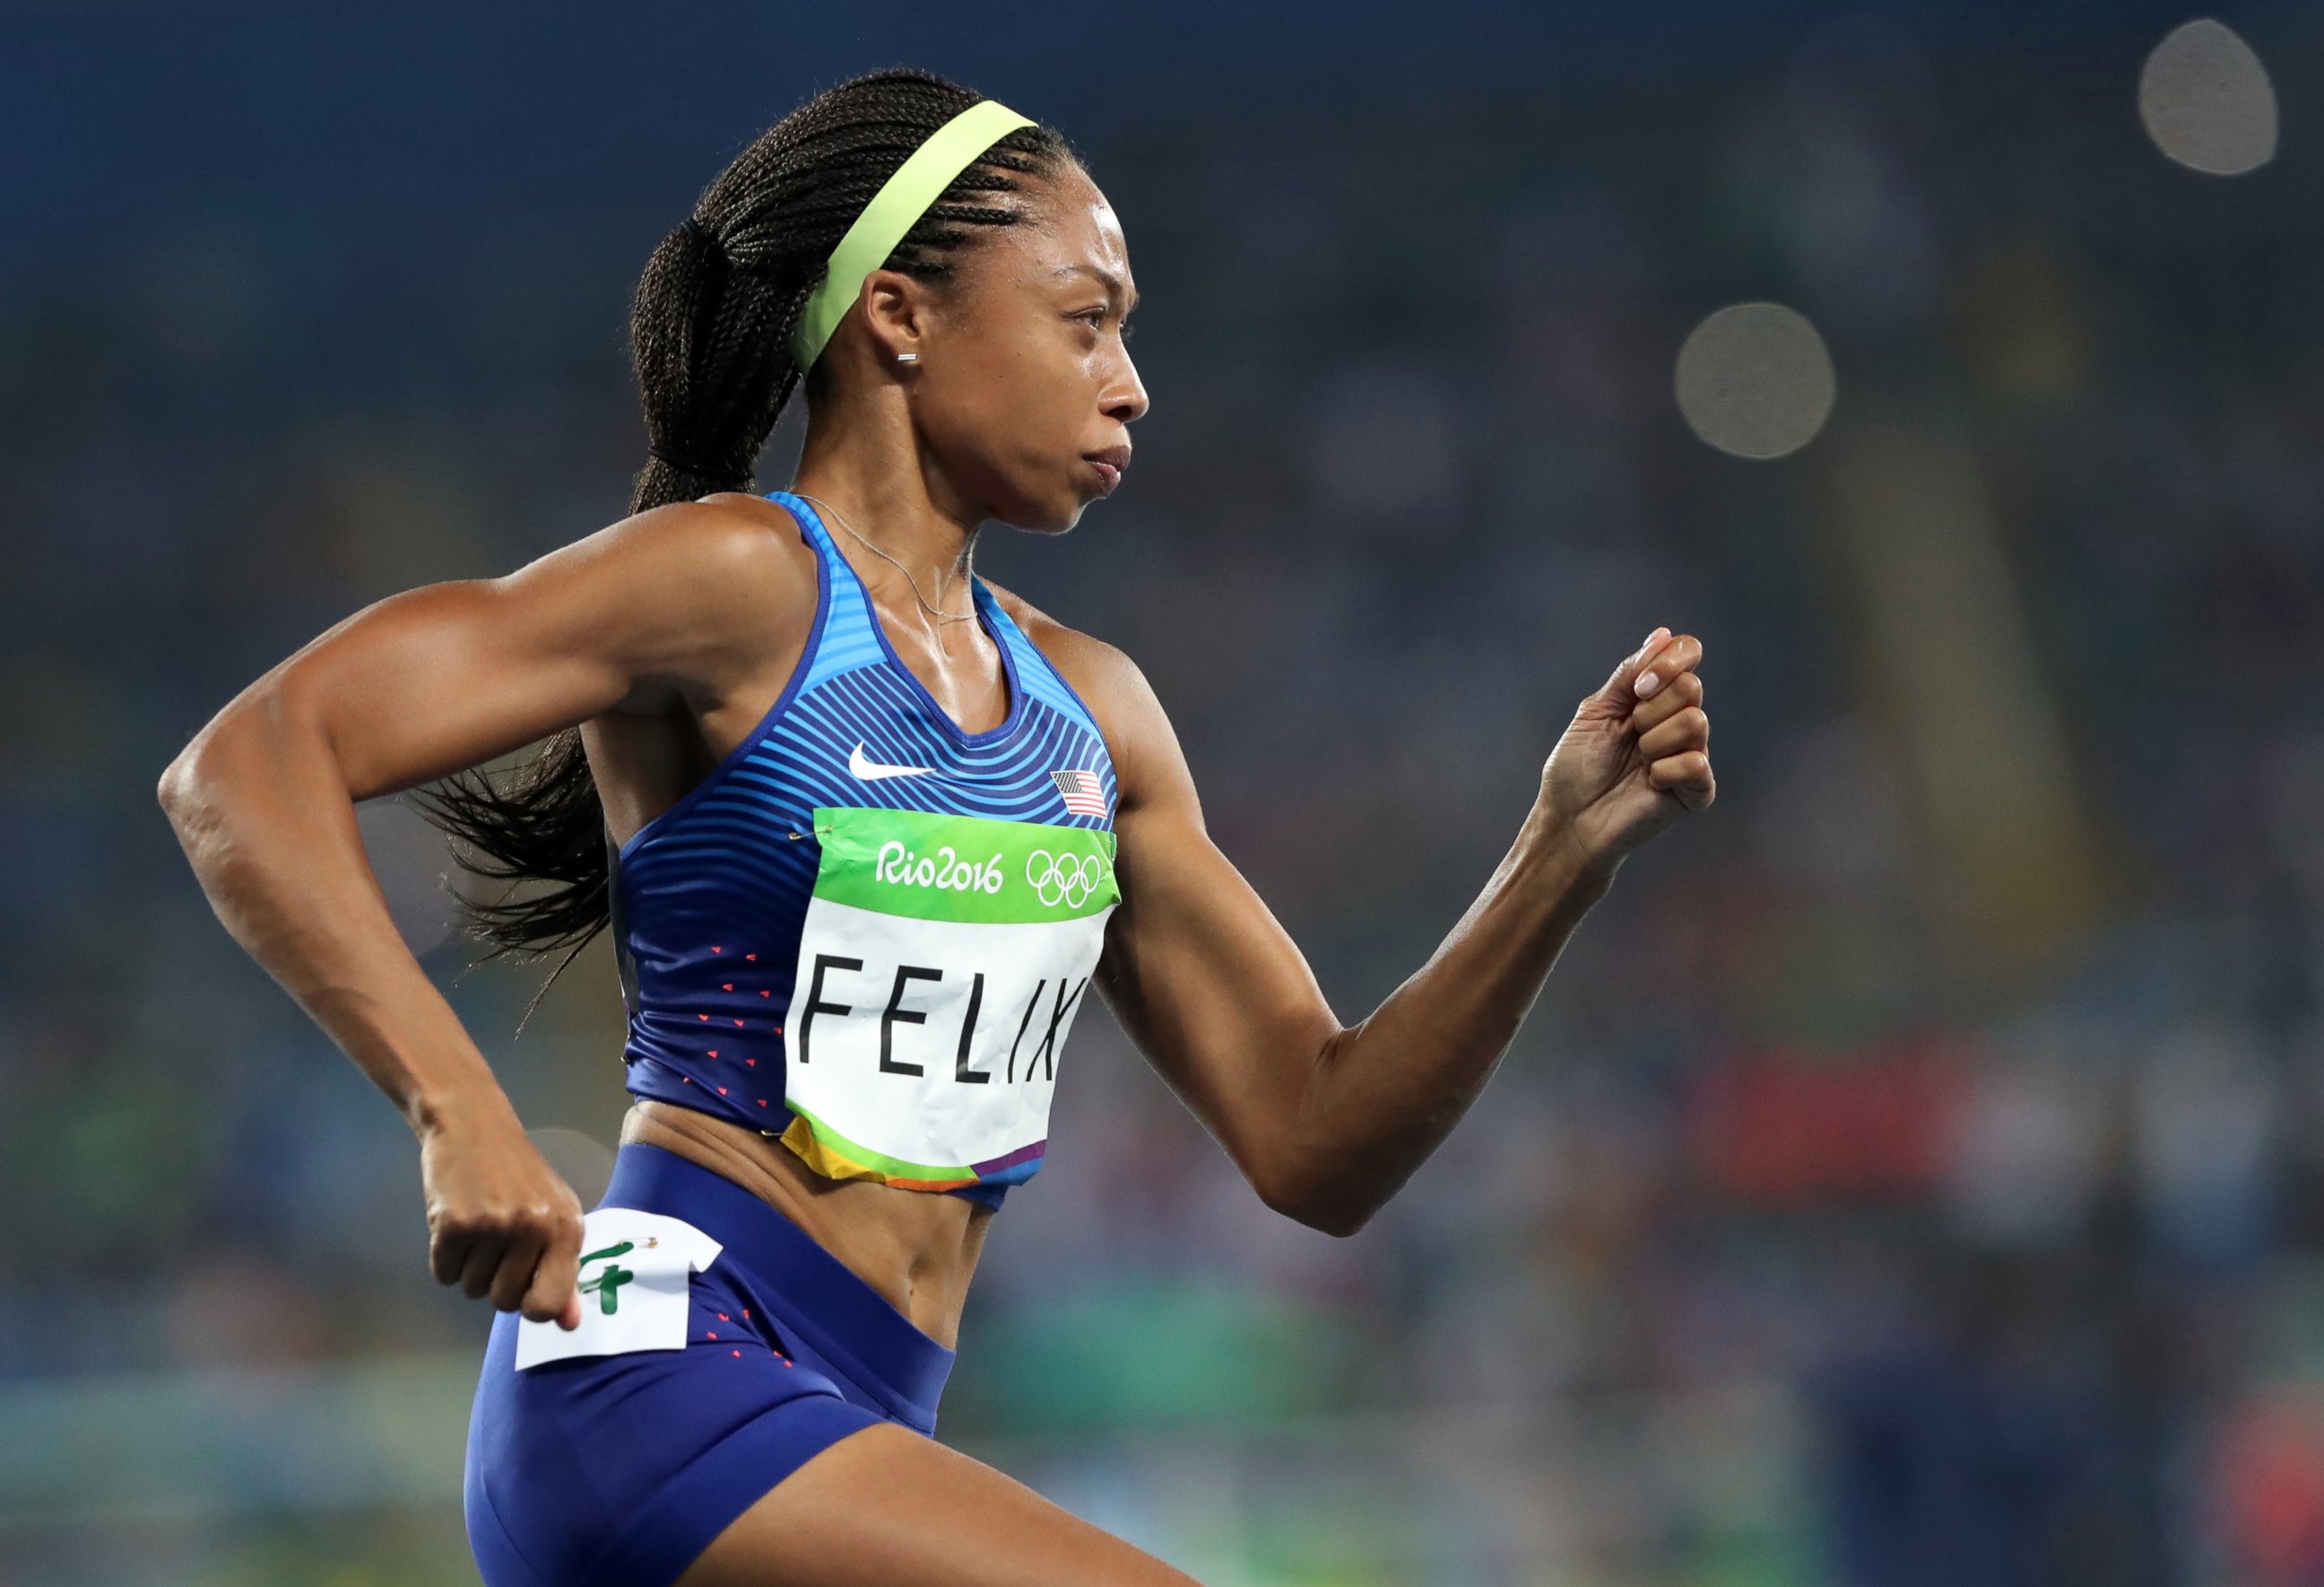 PHOTO: United States' Allyson Felix competes in the women's 400-meter final during the 2016 Summer Olympics in Rio de Janeiro, Aug. 15, 2016.